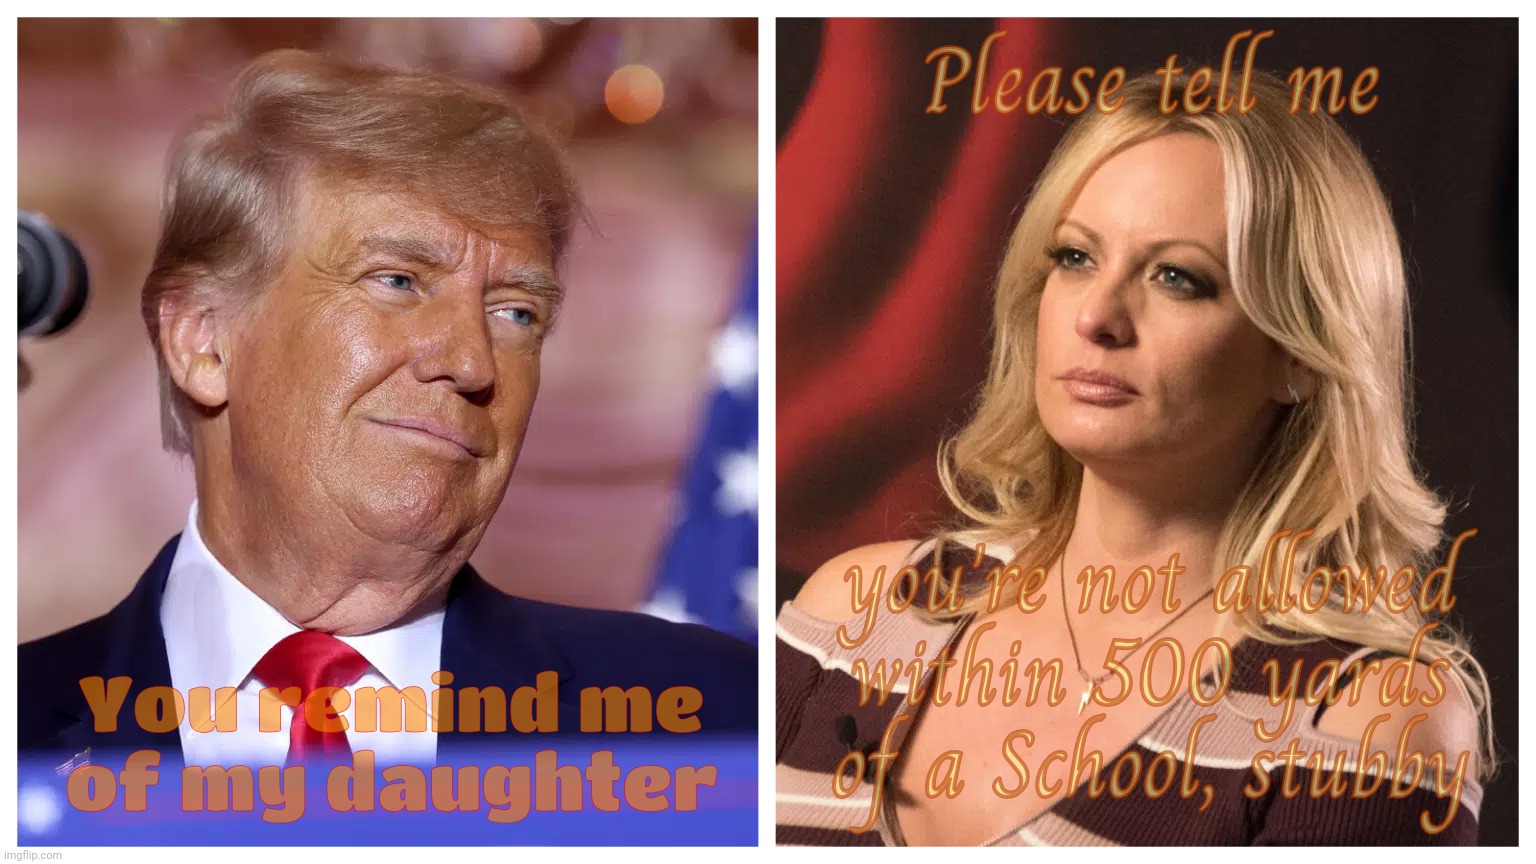 Paying someone for sex because she reminds him of his own daughter. Grabbing a certain ilk one pussy at a time,,, | Please tell me; you're not allowed within 500 yards
of a School, stubby; You remind me of my daughter | image tagged in donald trump,stormy daniels,ivanka trump,don't call me daughter,not fit to,appeals to a certain demographic | made w/ Imgflip meme maker